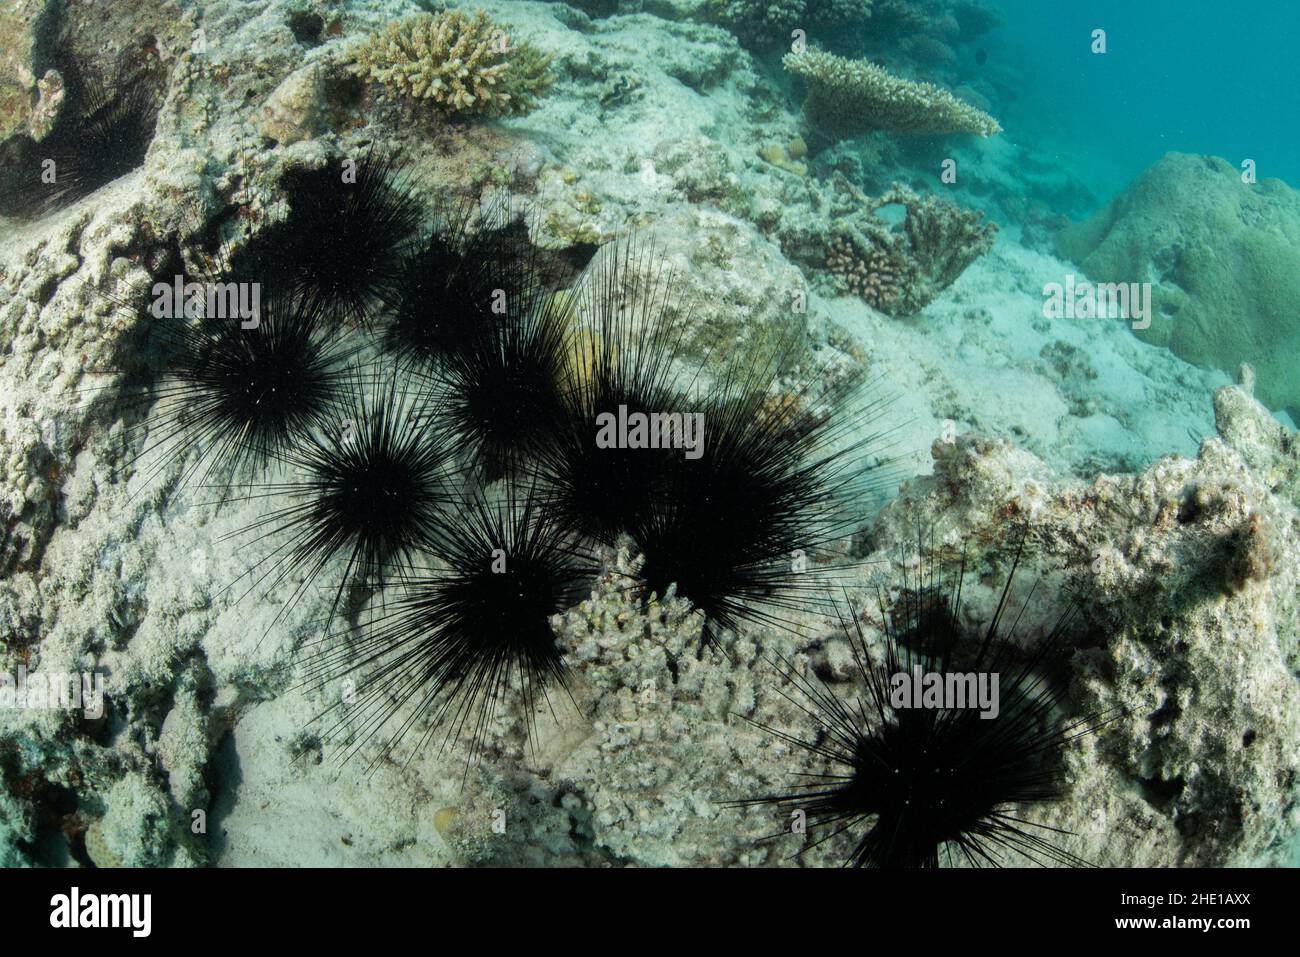 Diadema setosum, the black long spined urchin, on the ocean floor in the red sea near Hurghada, Egypt. Stock Photo